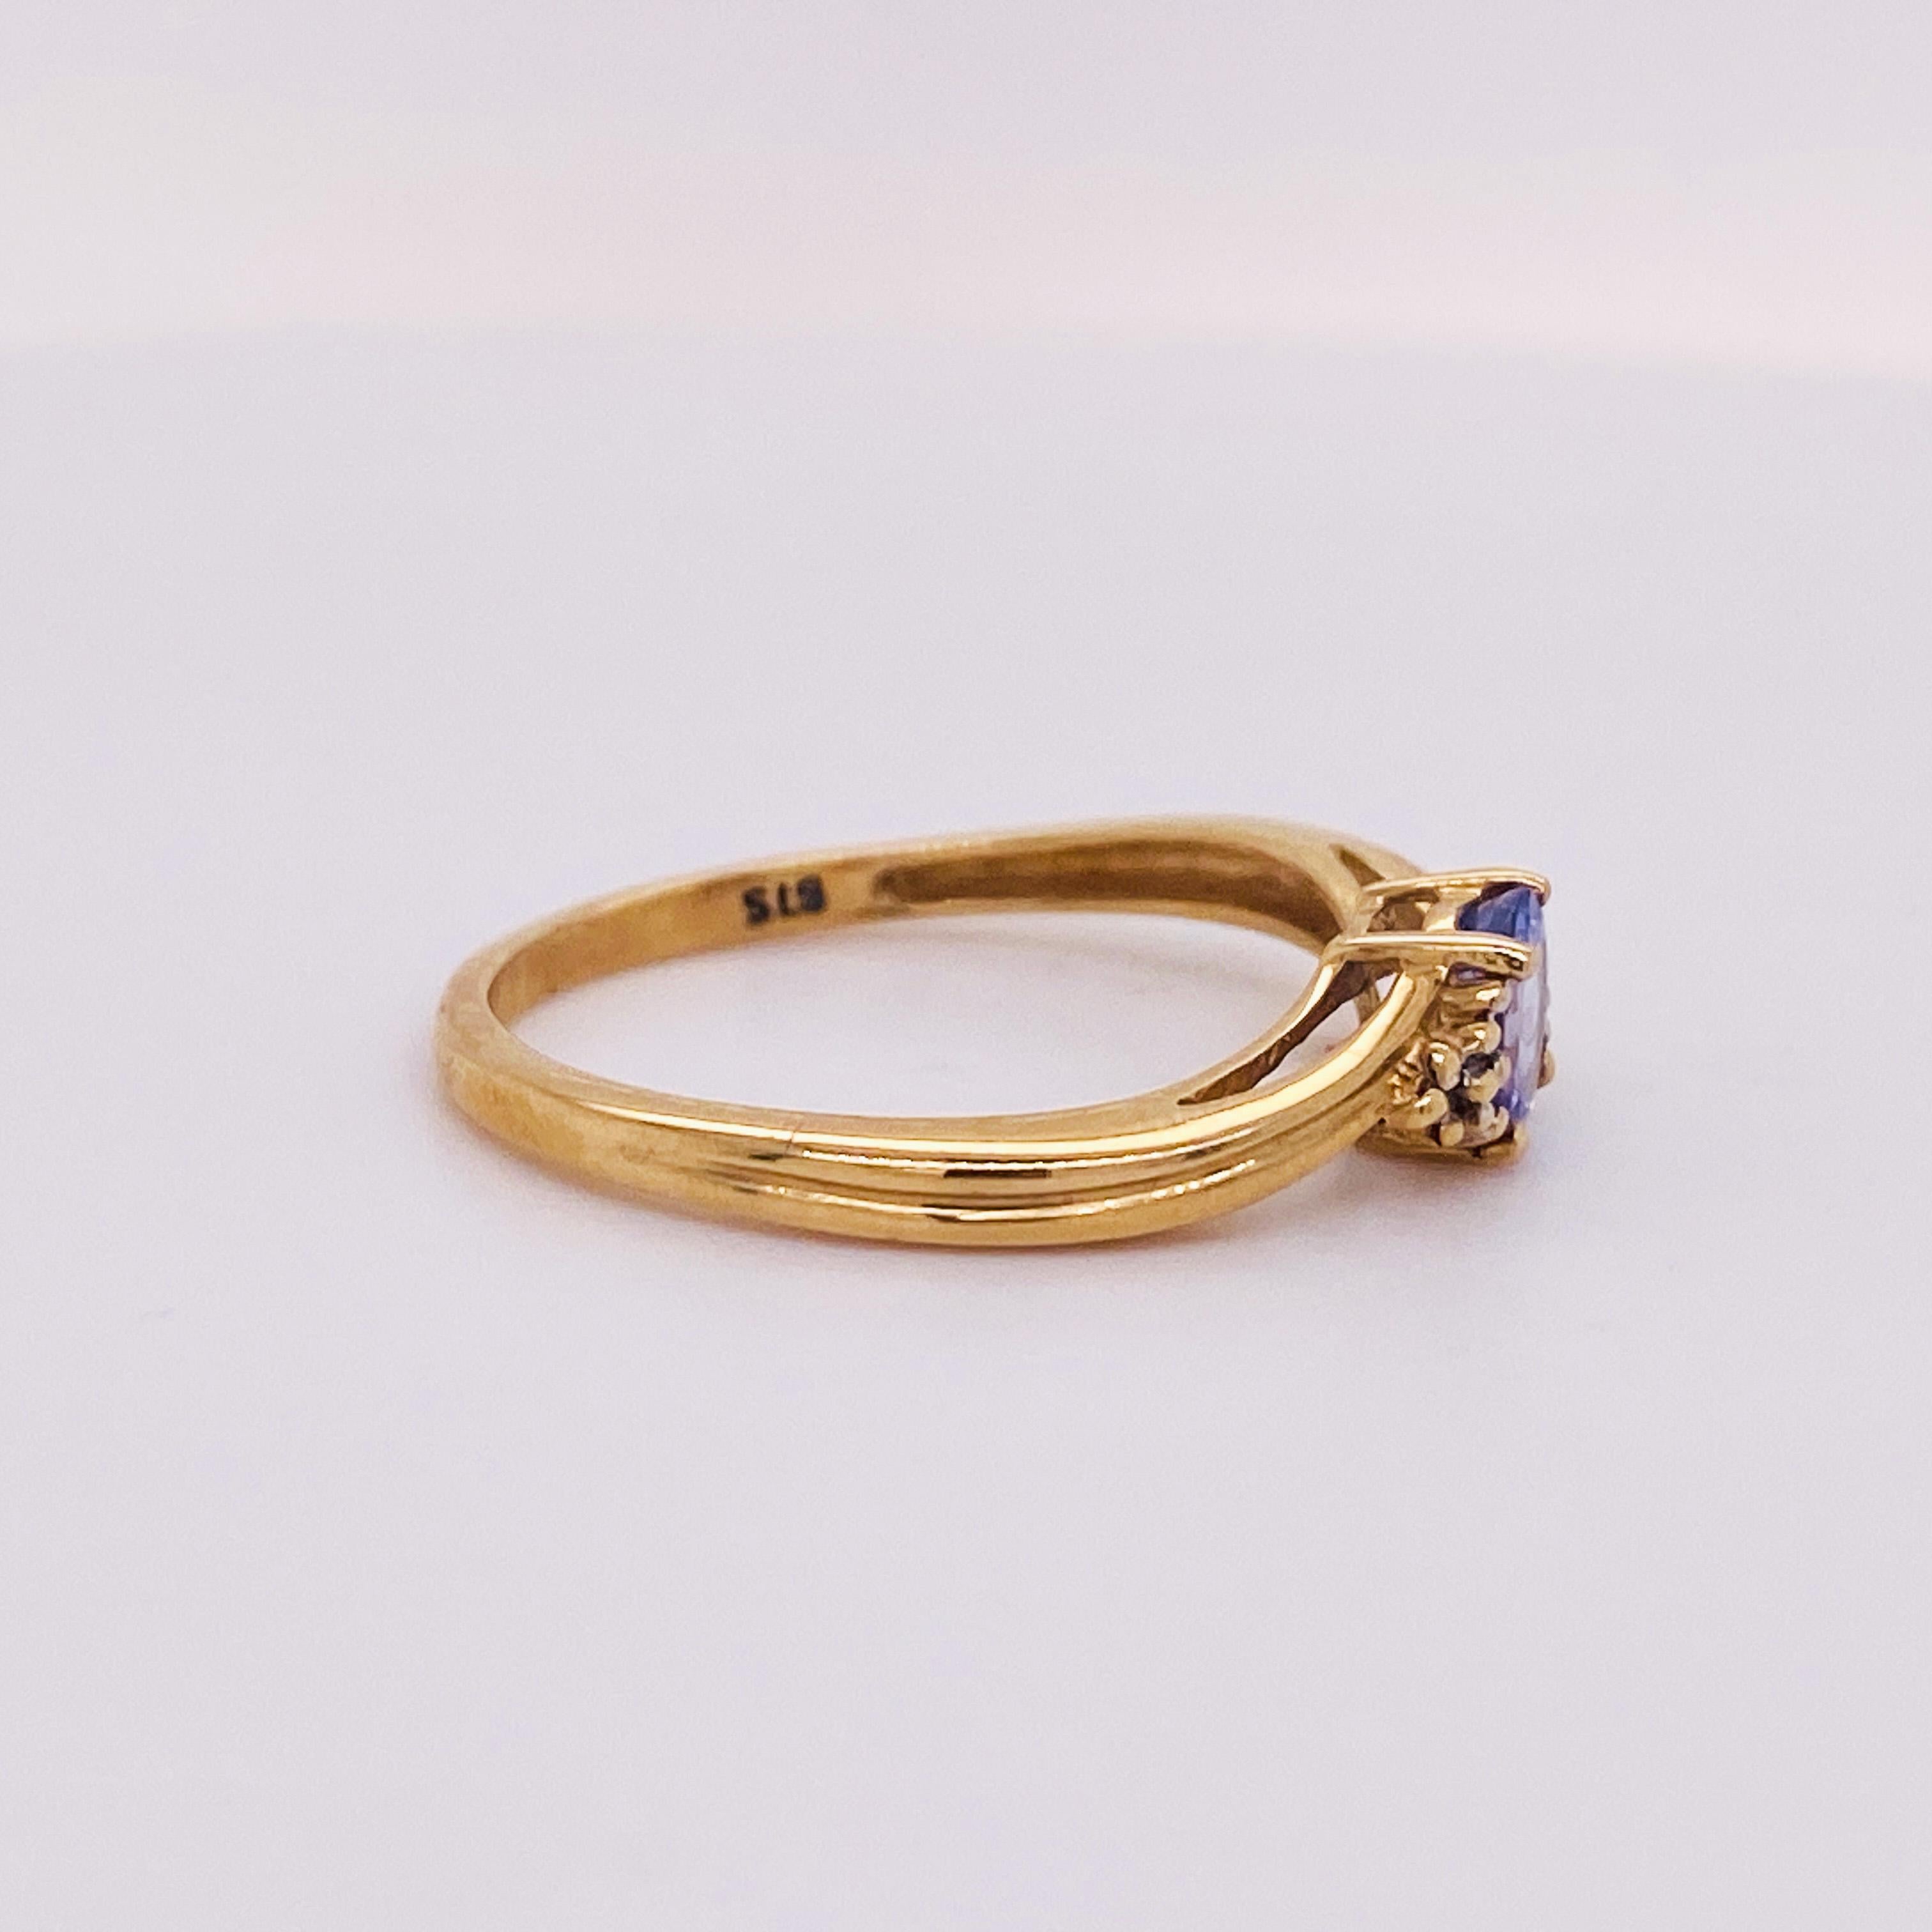 Like a bachelor button flower you can wear any time, this beautiful tanzanite floral ring has a graceful curve to the band and small gold pips around the tanzanite to give a feel that sweeps you away to a meadow any time you look at it. Sitting